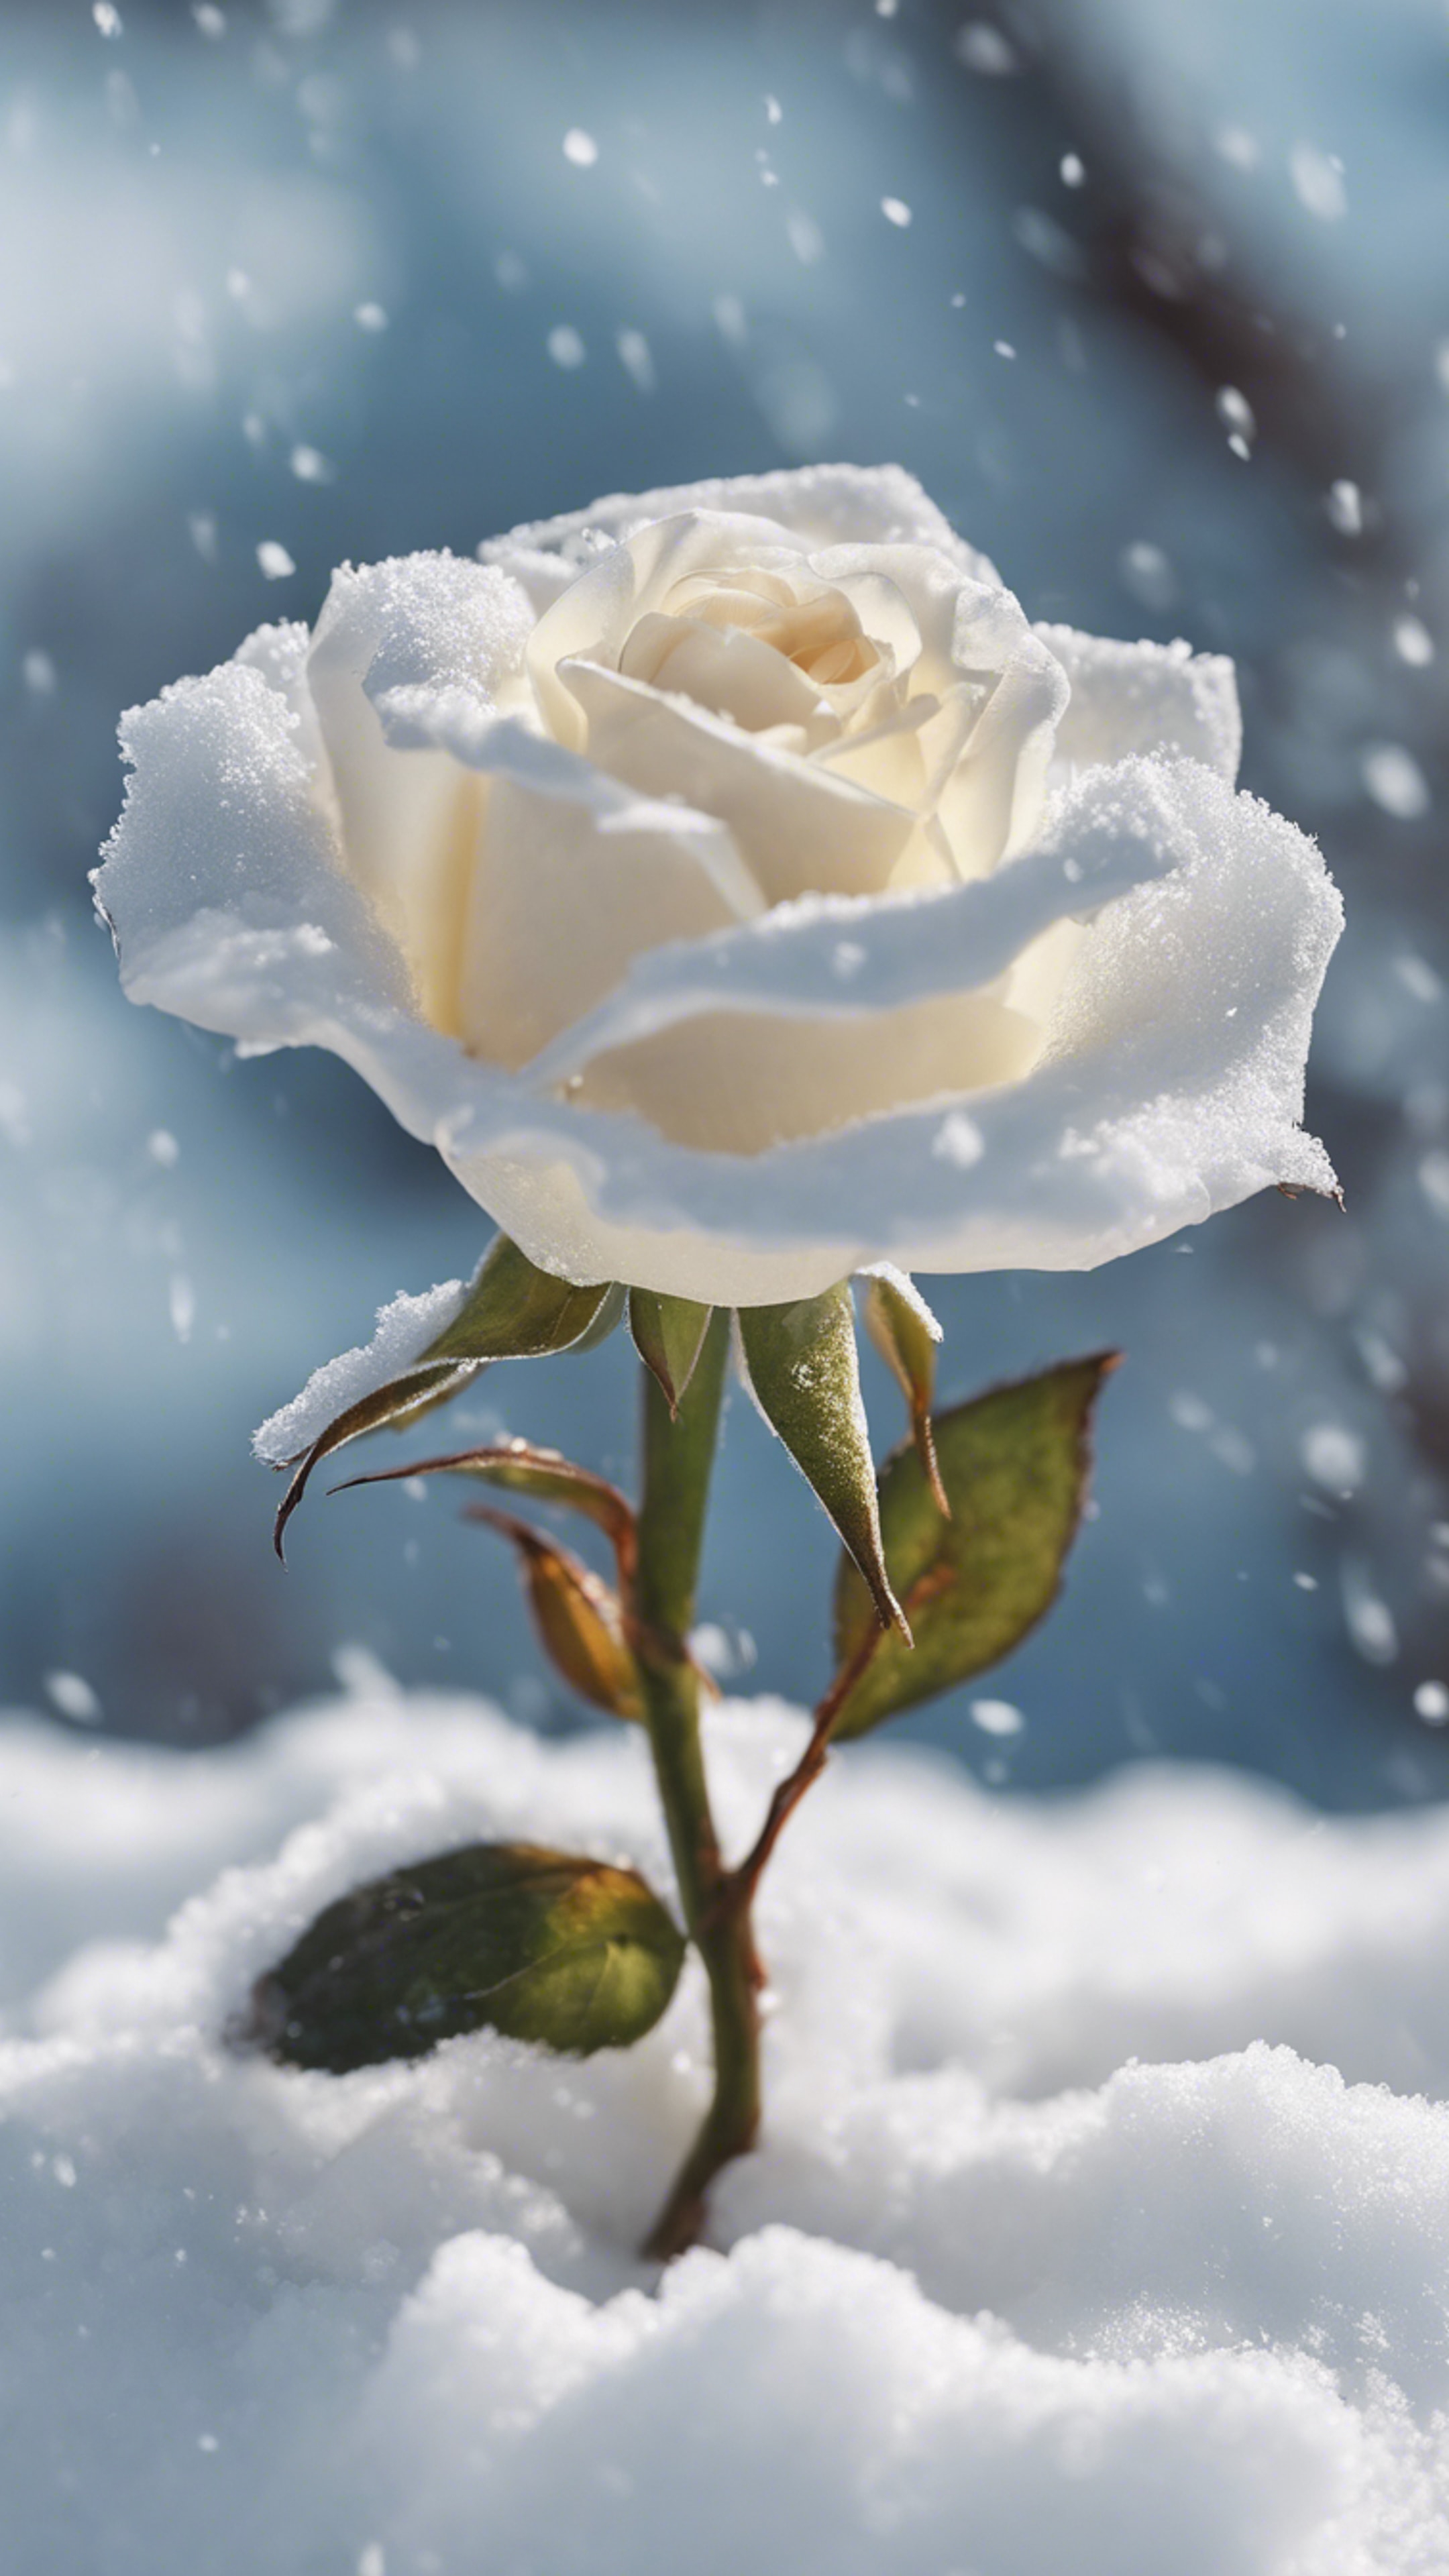 A newly opened white rose sticking out of a snowdrift in early spring. Papel de parede[6918b7c4f5774047824c]